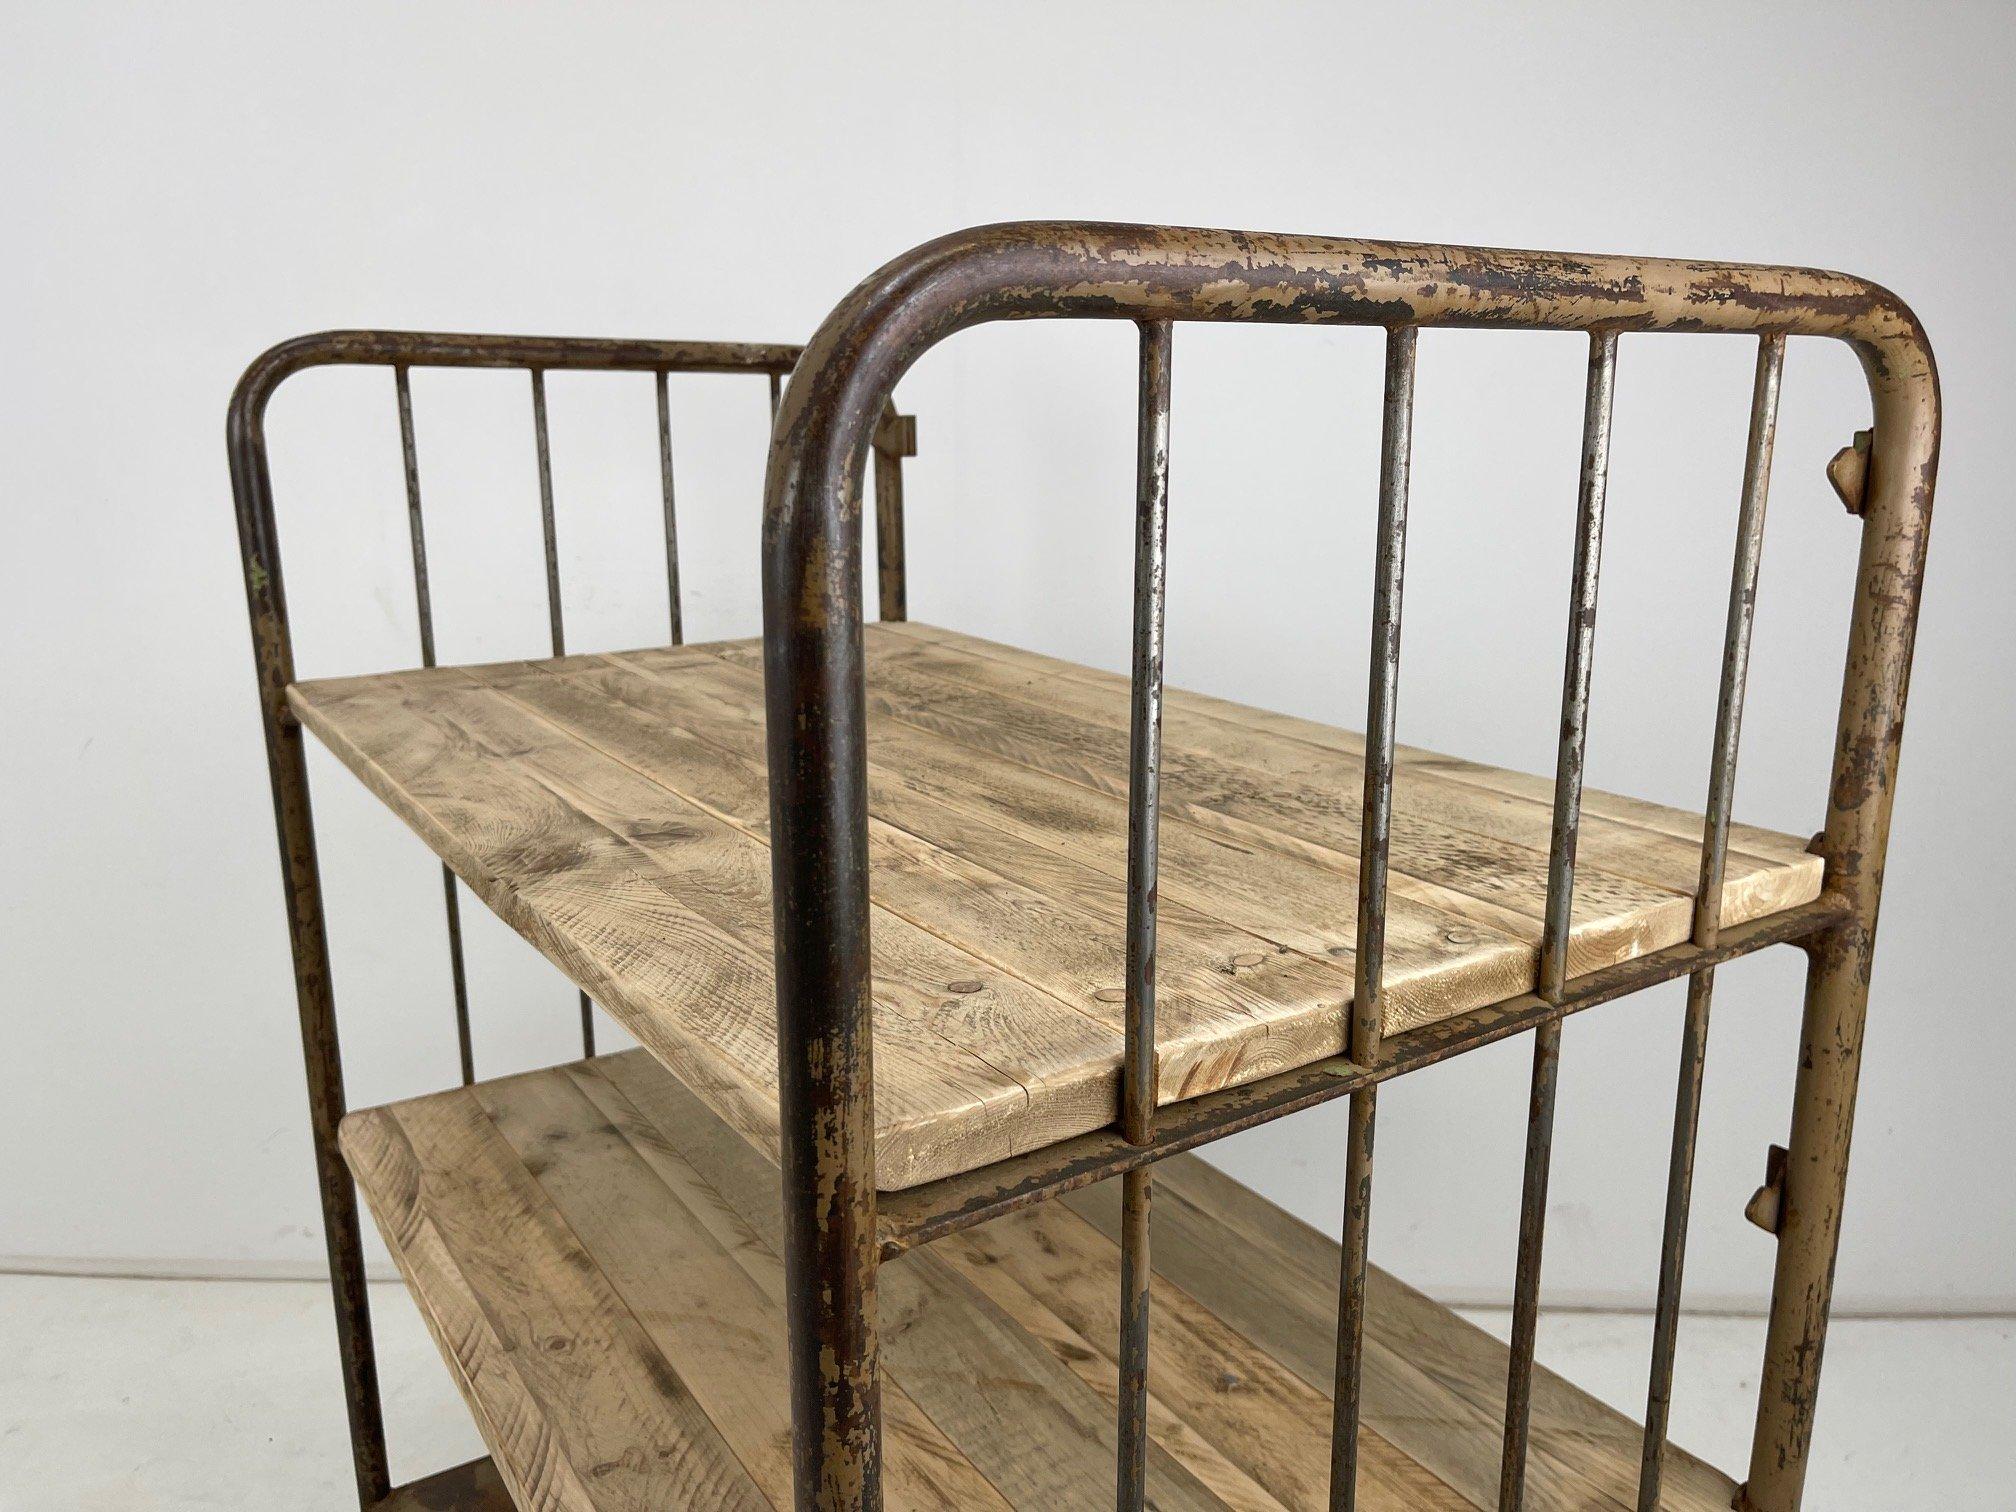 Czech Vintage Industrial Iron and Wood Shelves on Wheels For Sale